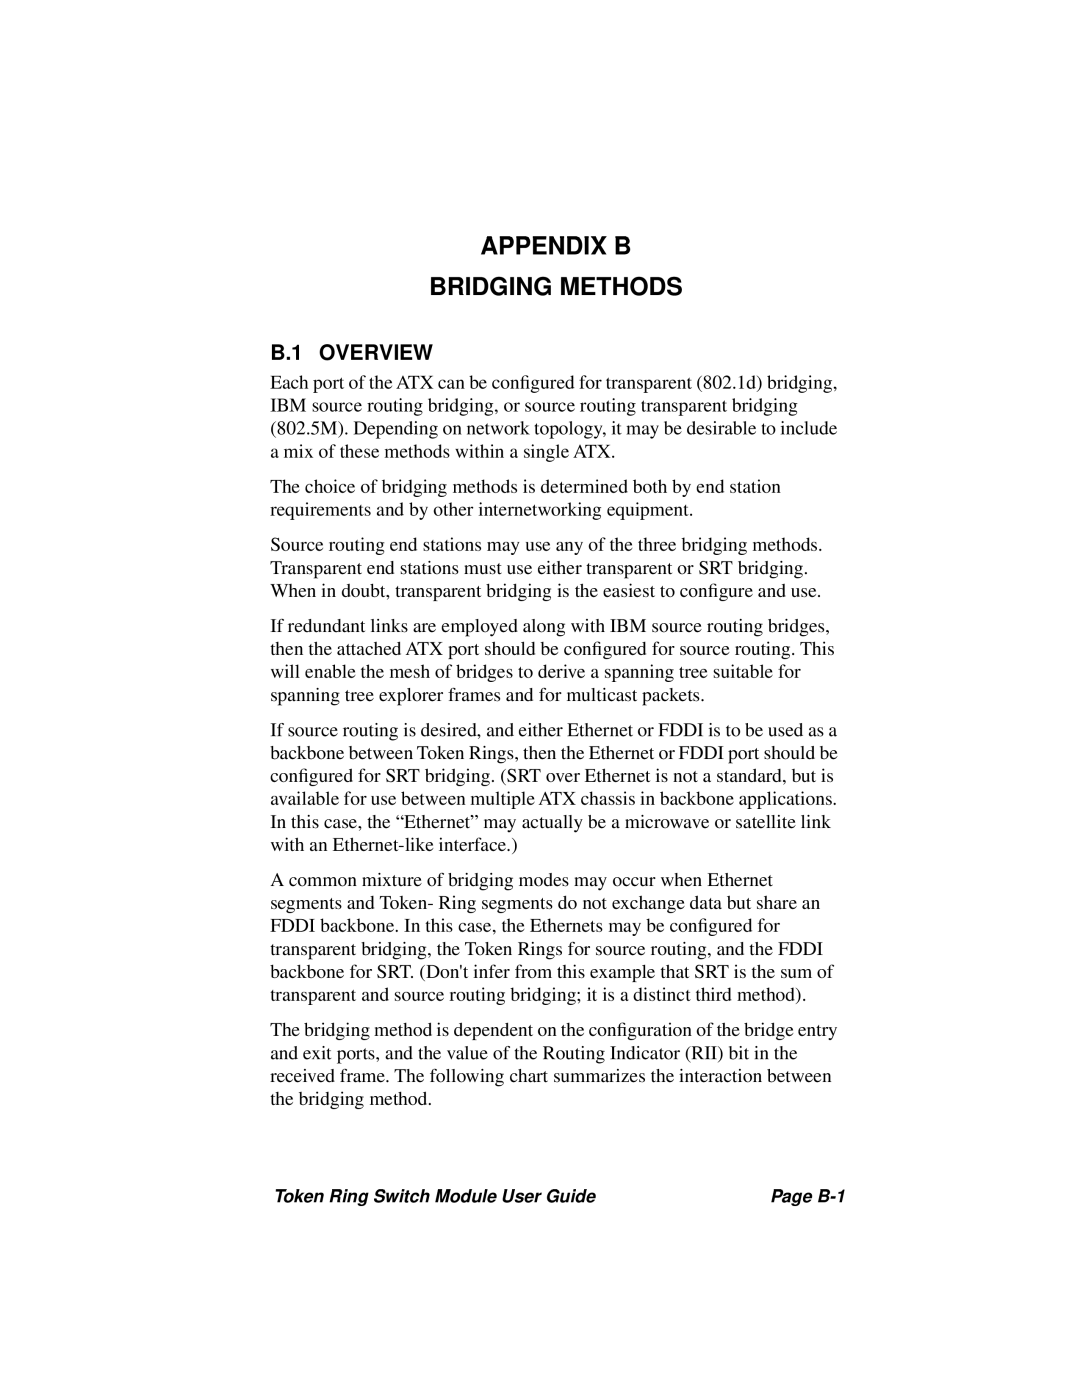 Cabletron Systems 3T02-04 manual Appendix B Bridging Methods, B.1 OVERVIEW 